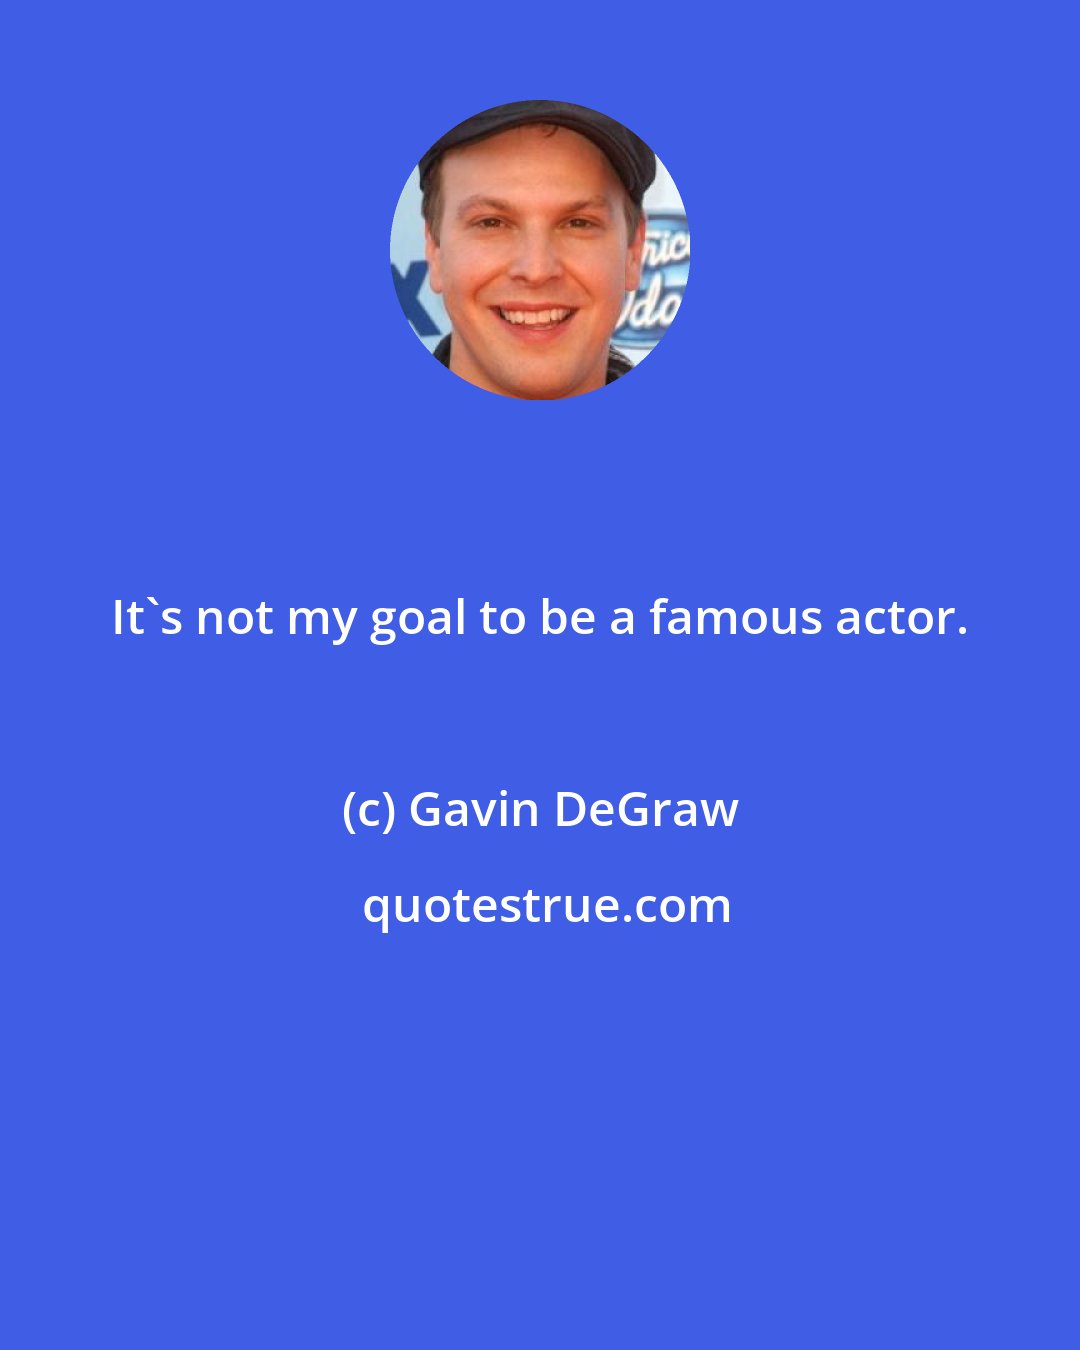 Gavin DeGraw: It's not my goal to be a famous actor.